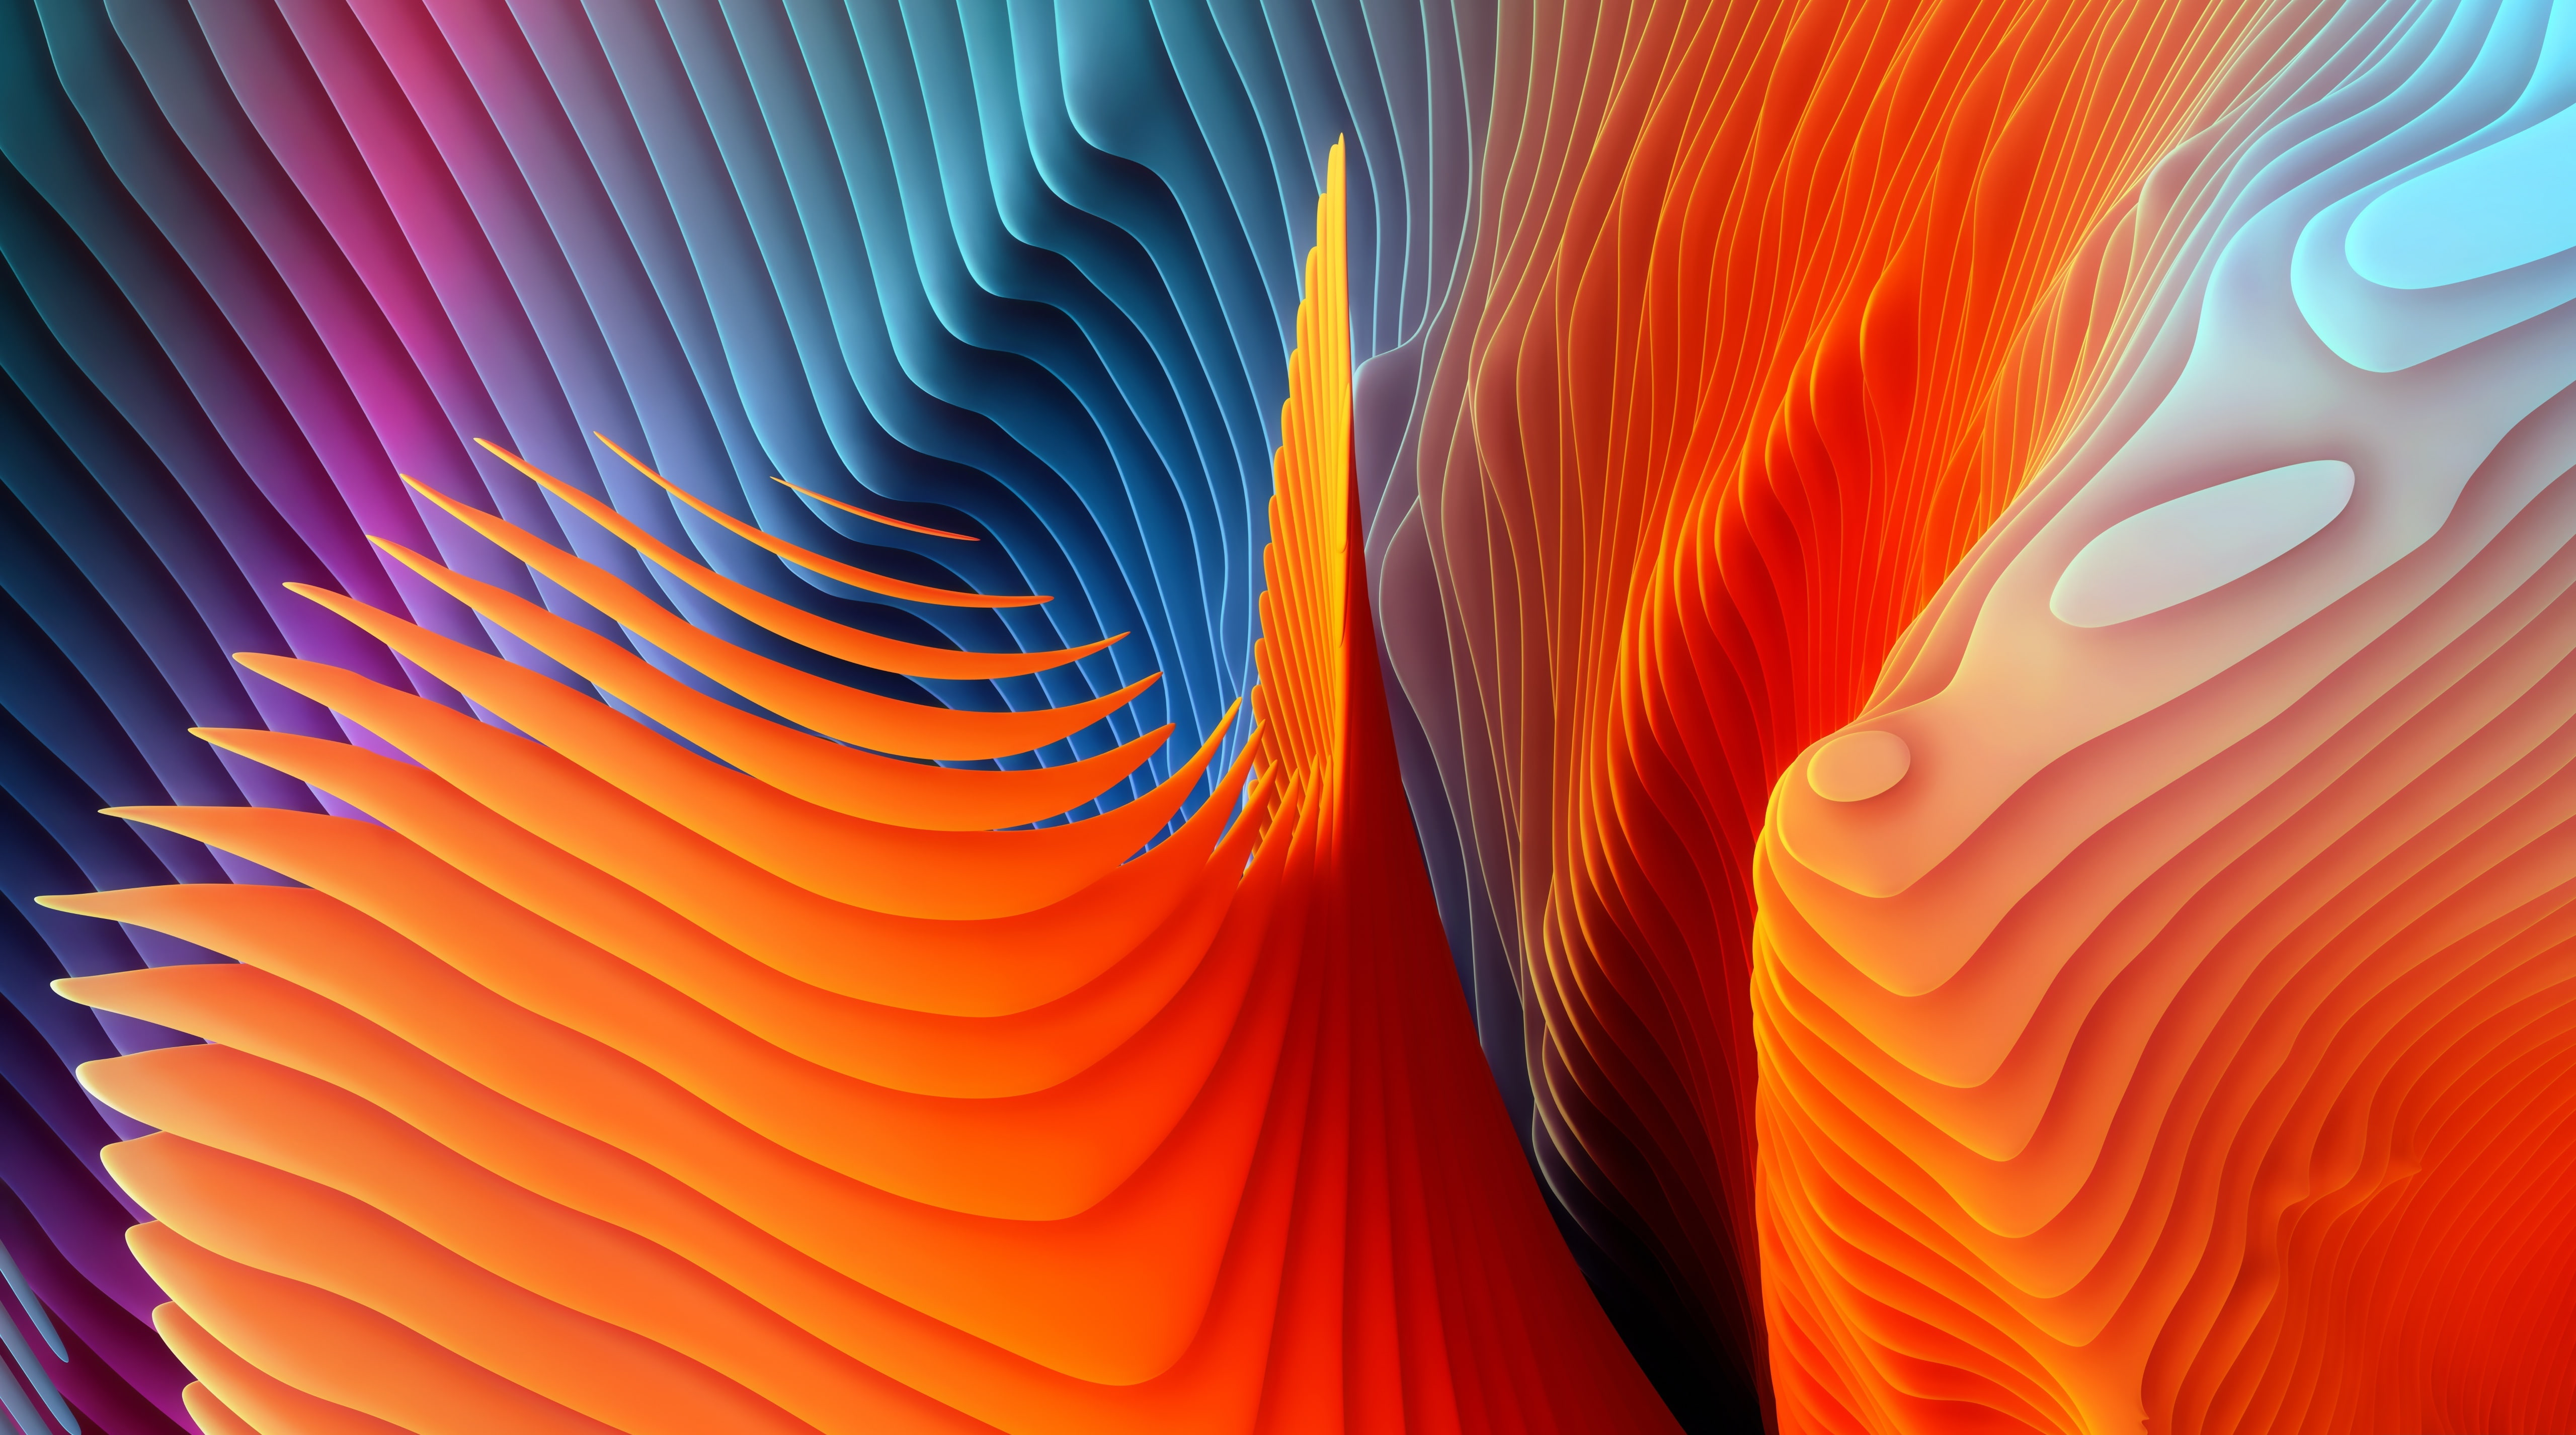 Wallpaper Apple Abstract, Orange, White, And Blue Abstract - Wallpaperforu